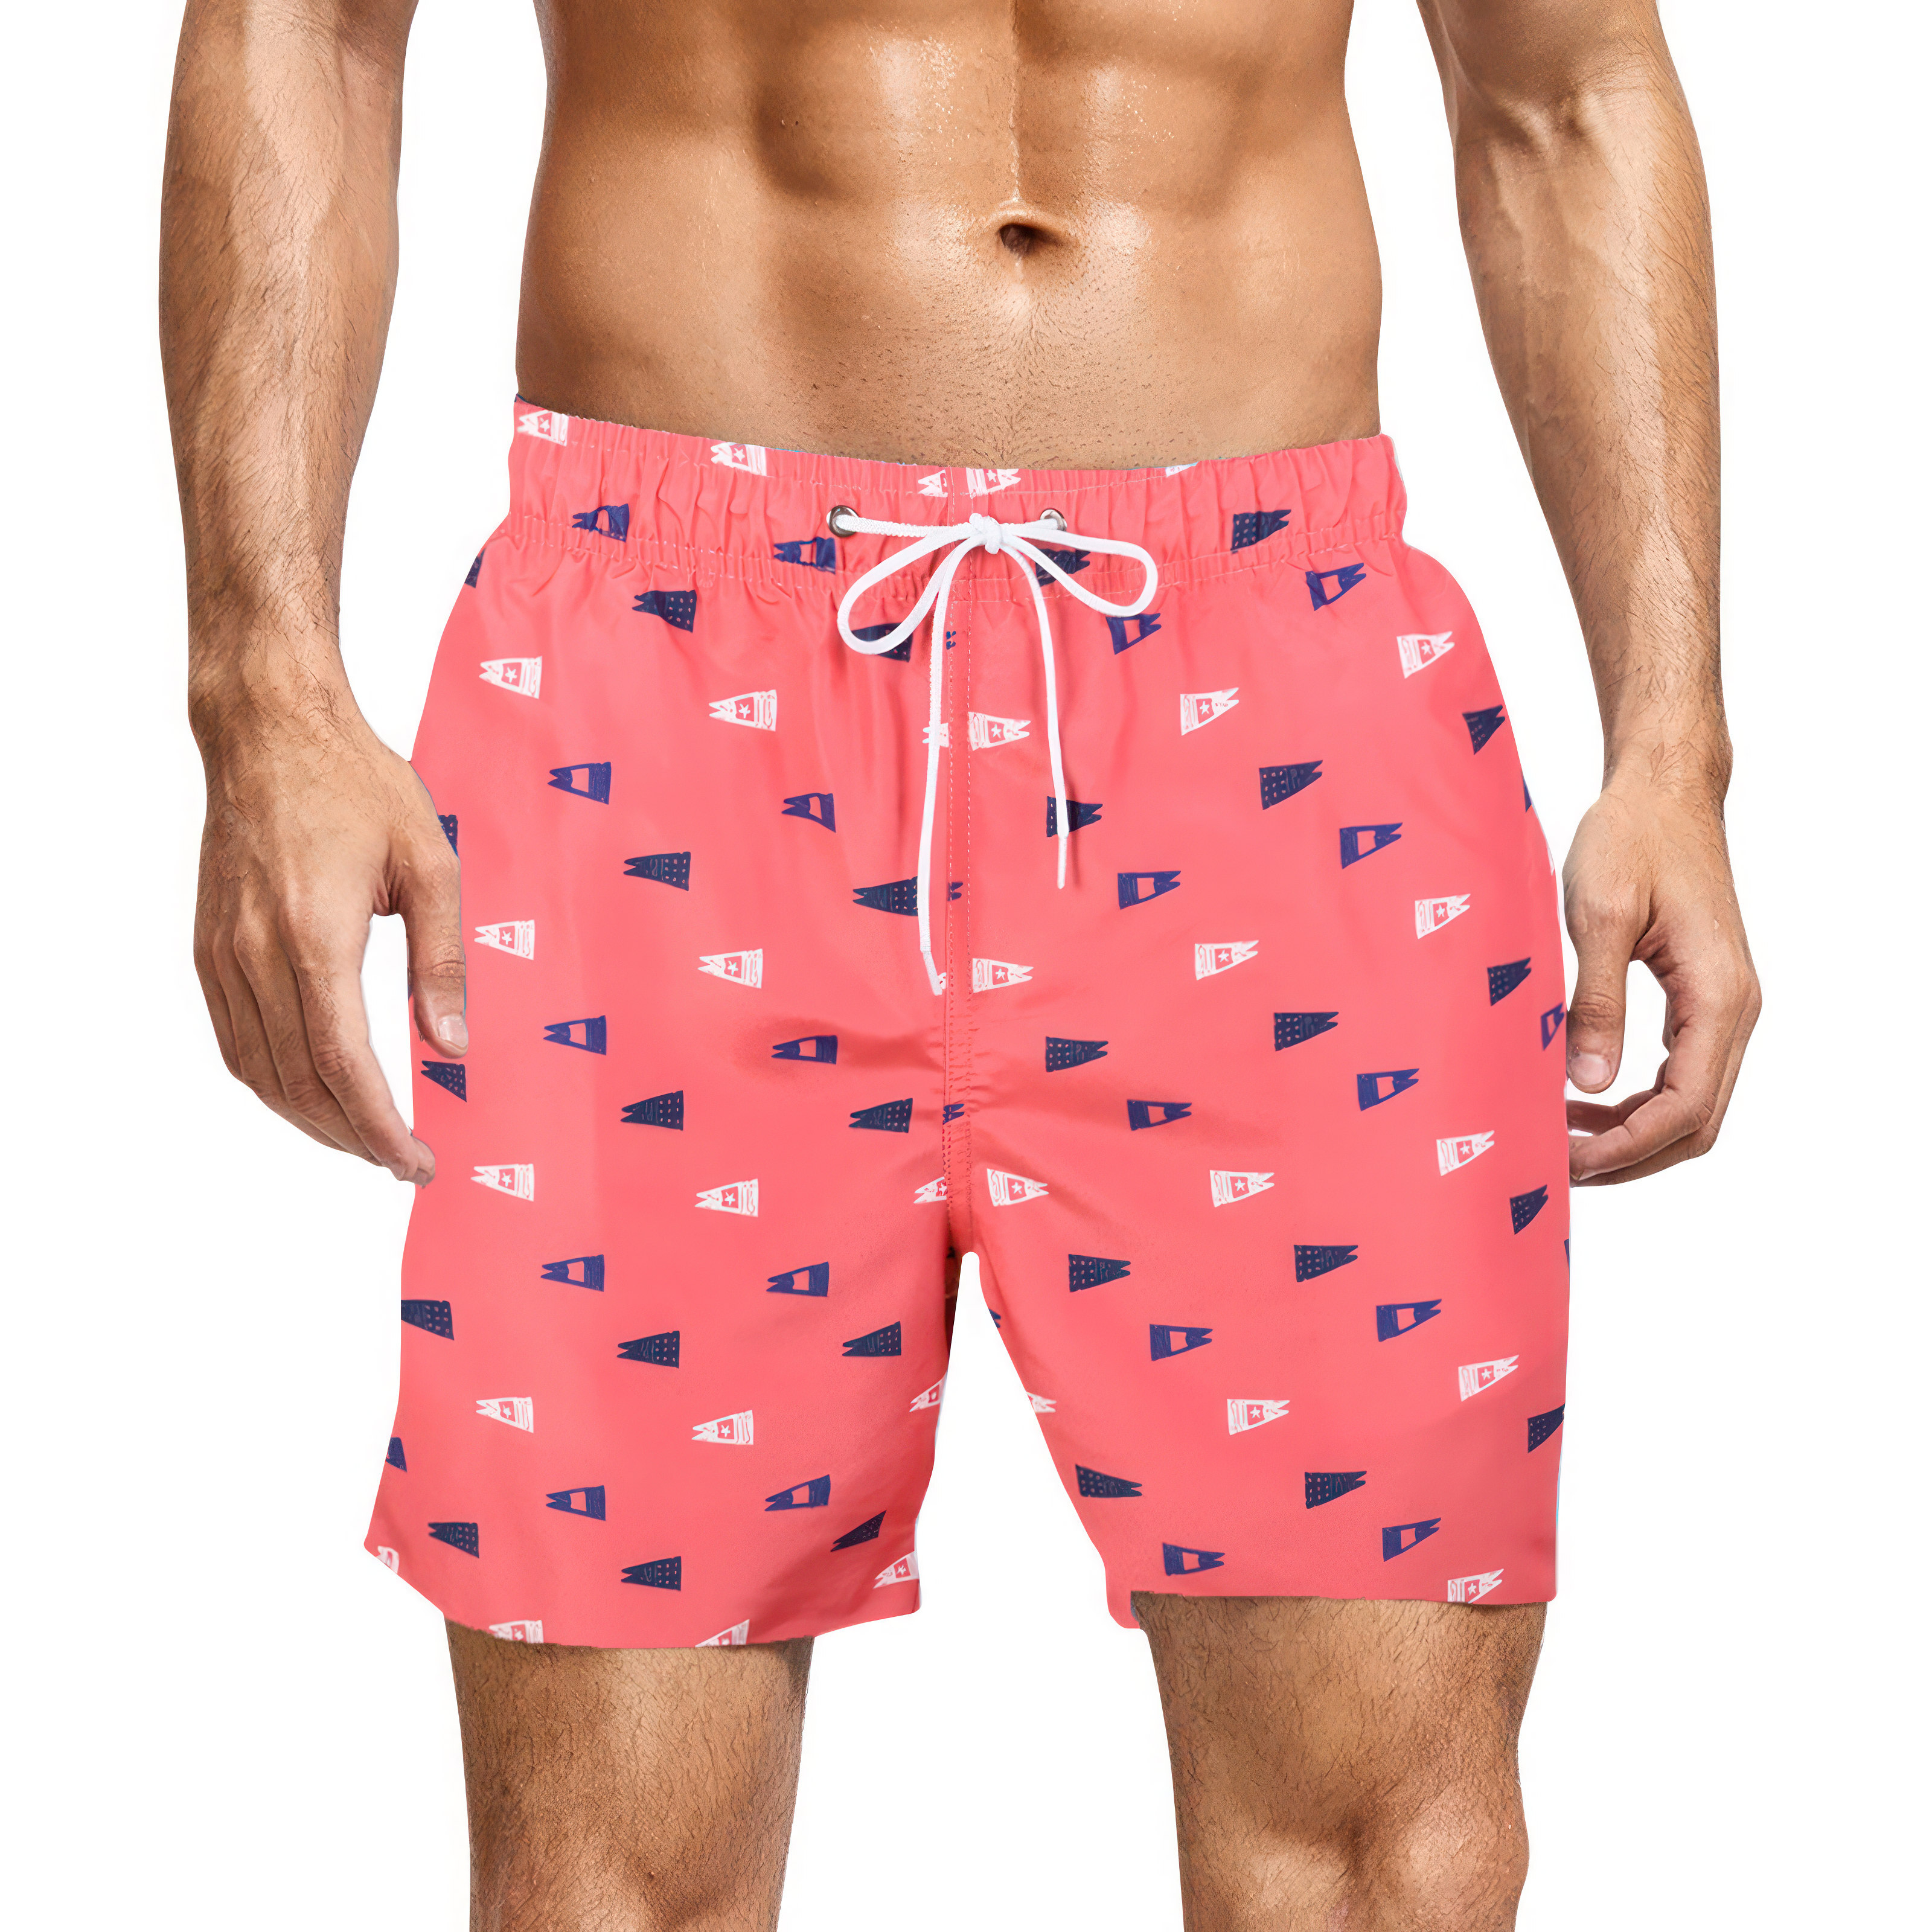 3-Pack Men's Printed Swim Shorts With Pockets Quick Dry Beachwear Bathing Suits Board Trunks - XXL